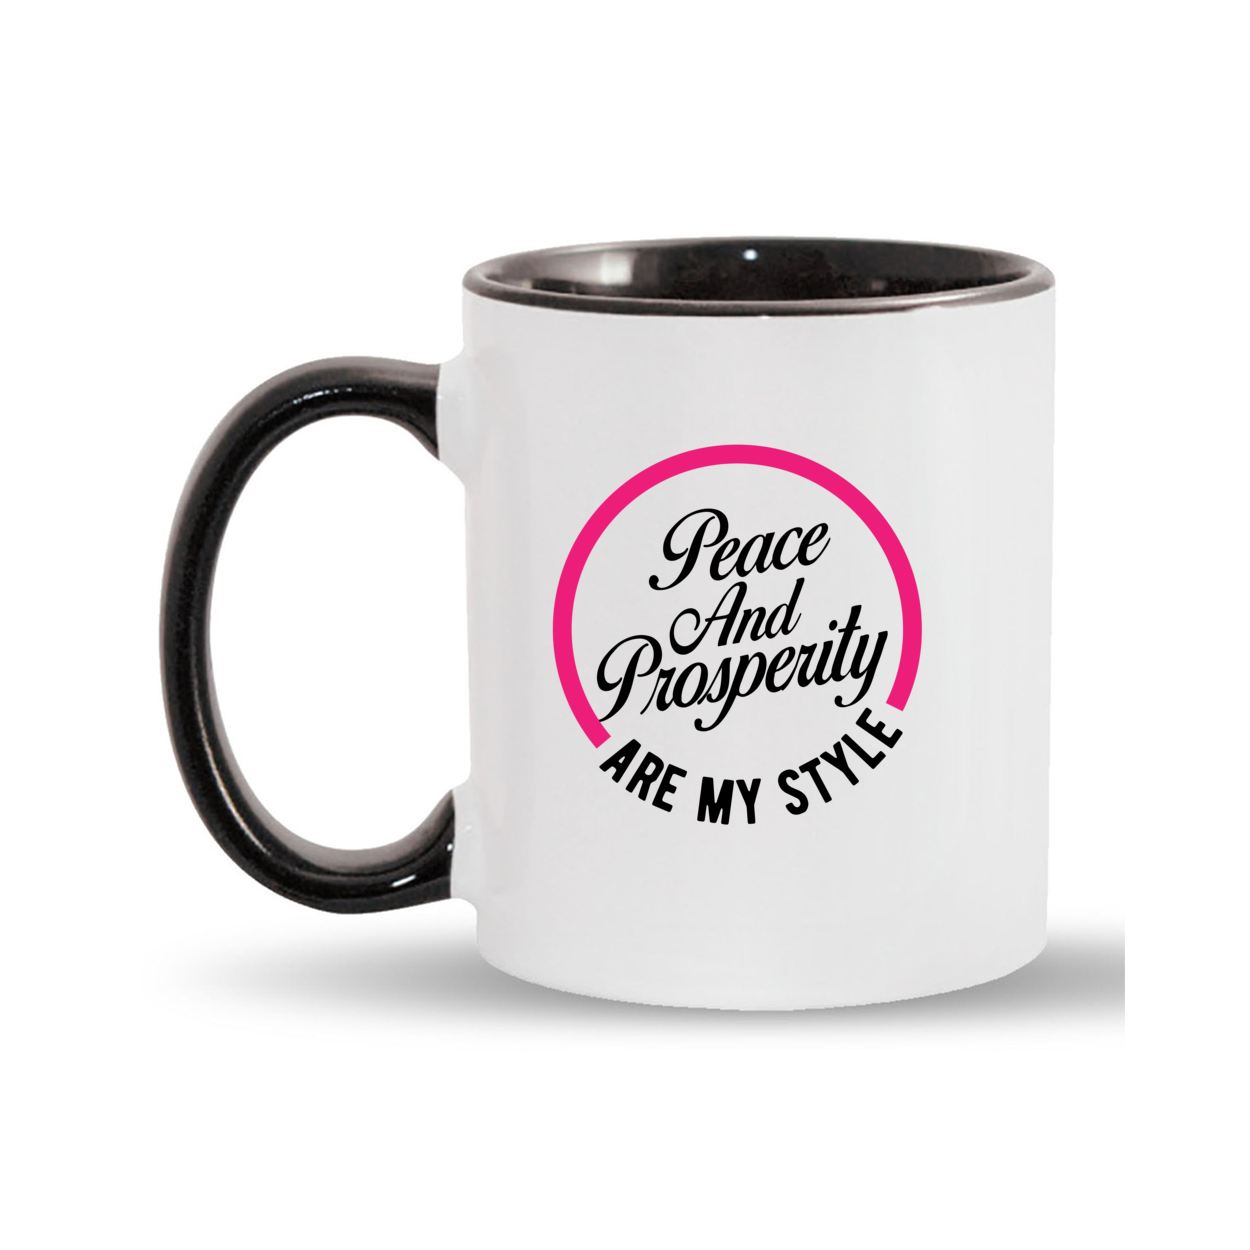 Peace and Prospersity are My Style 11oz. Mugs